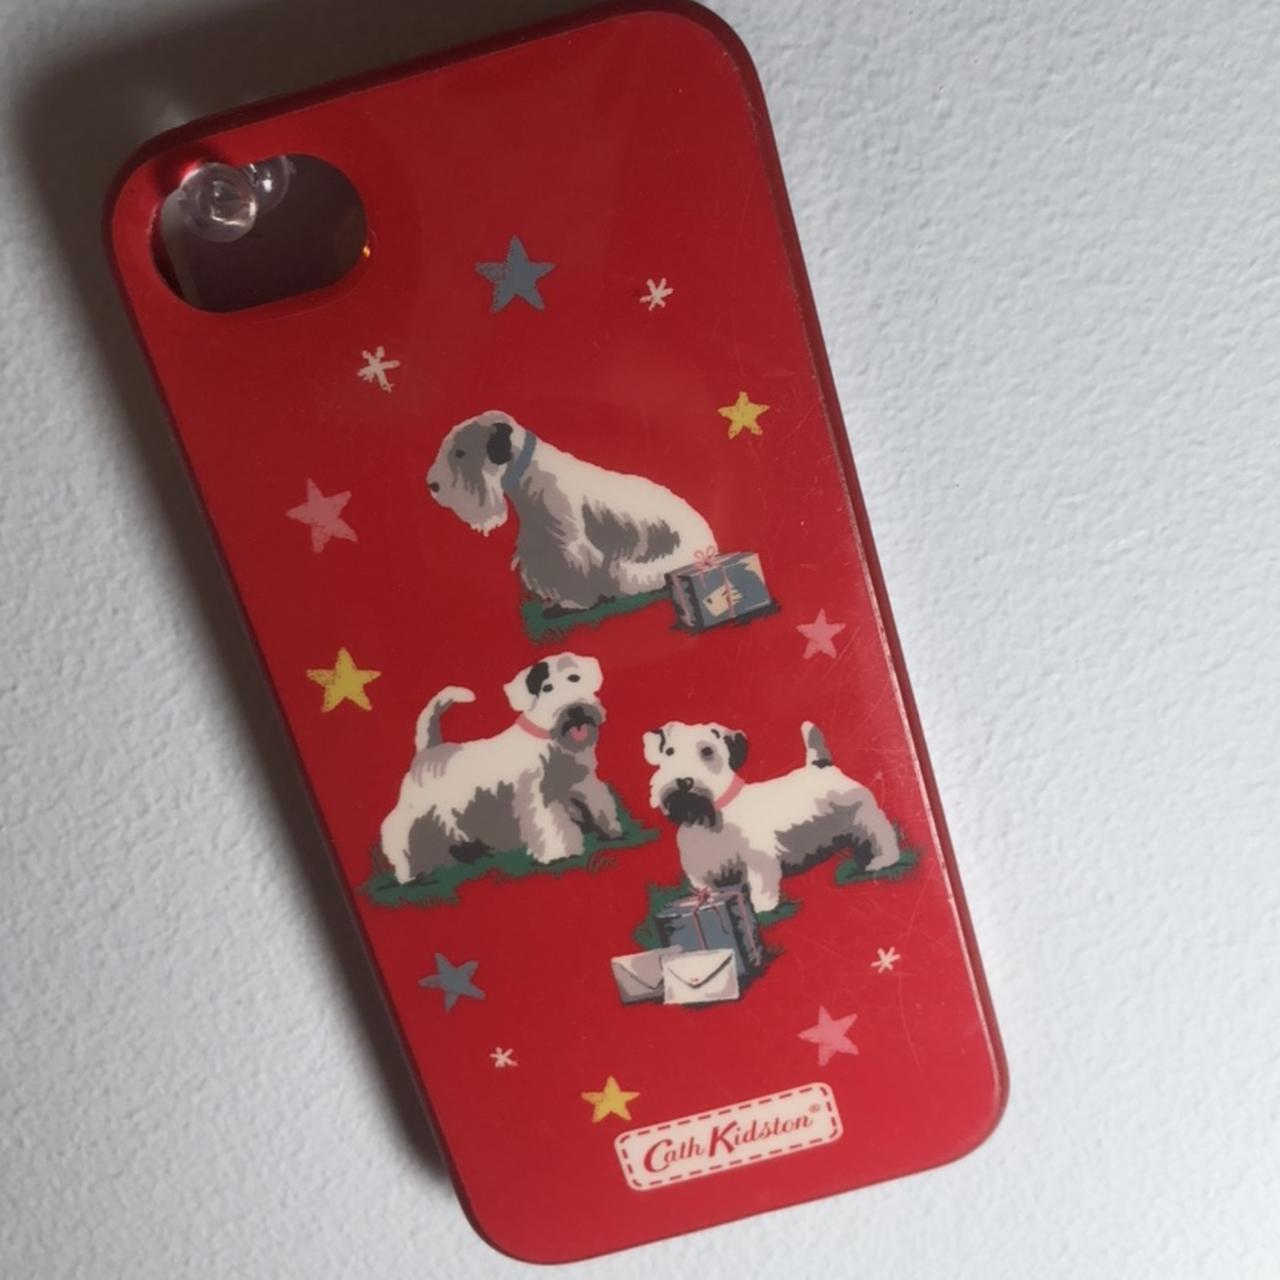 Cath Kidston Red Phone-cases (4)